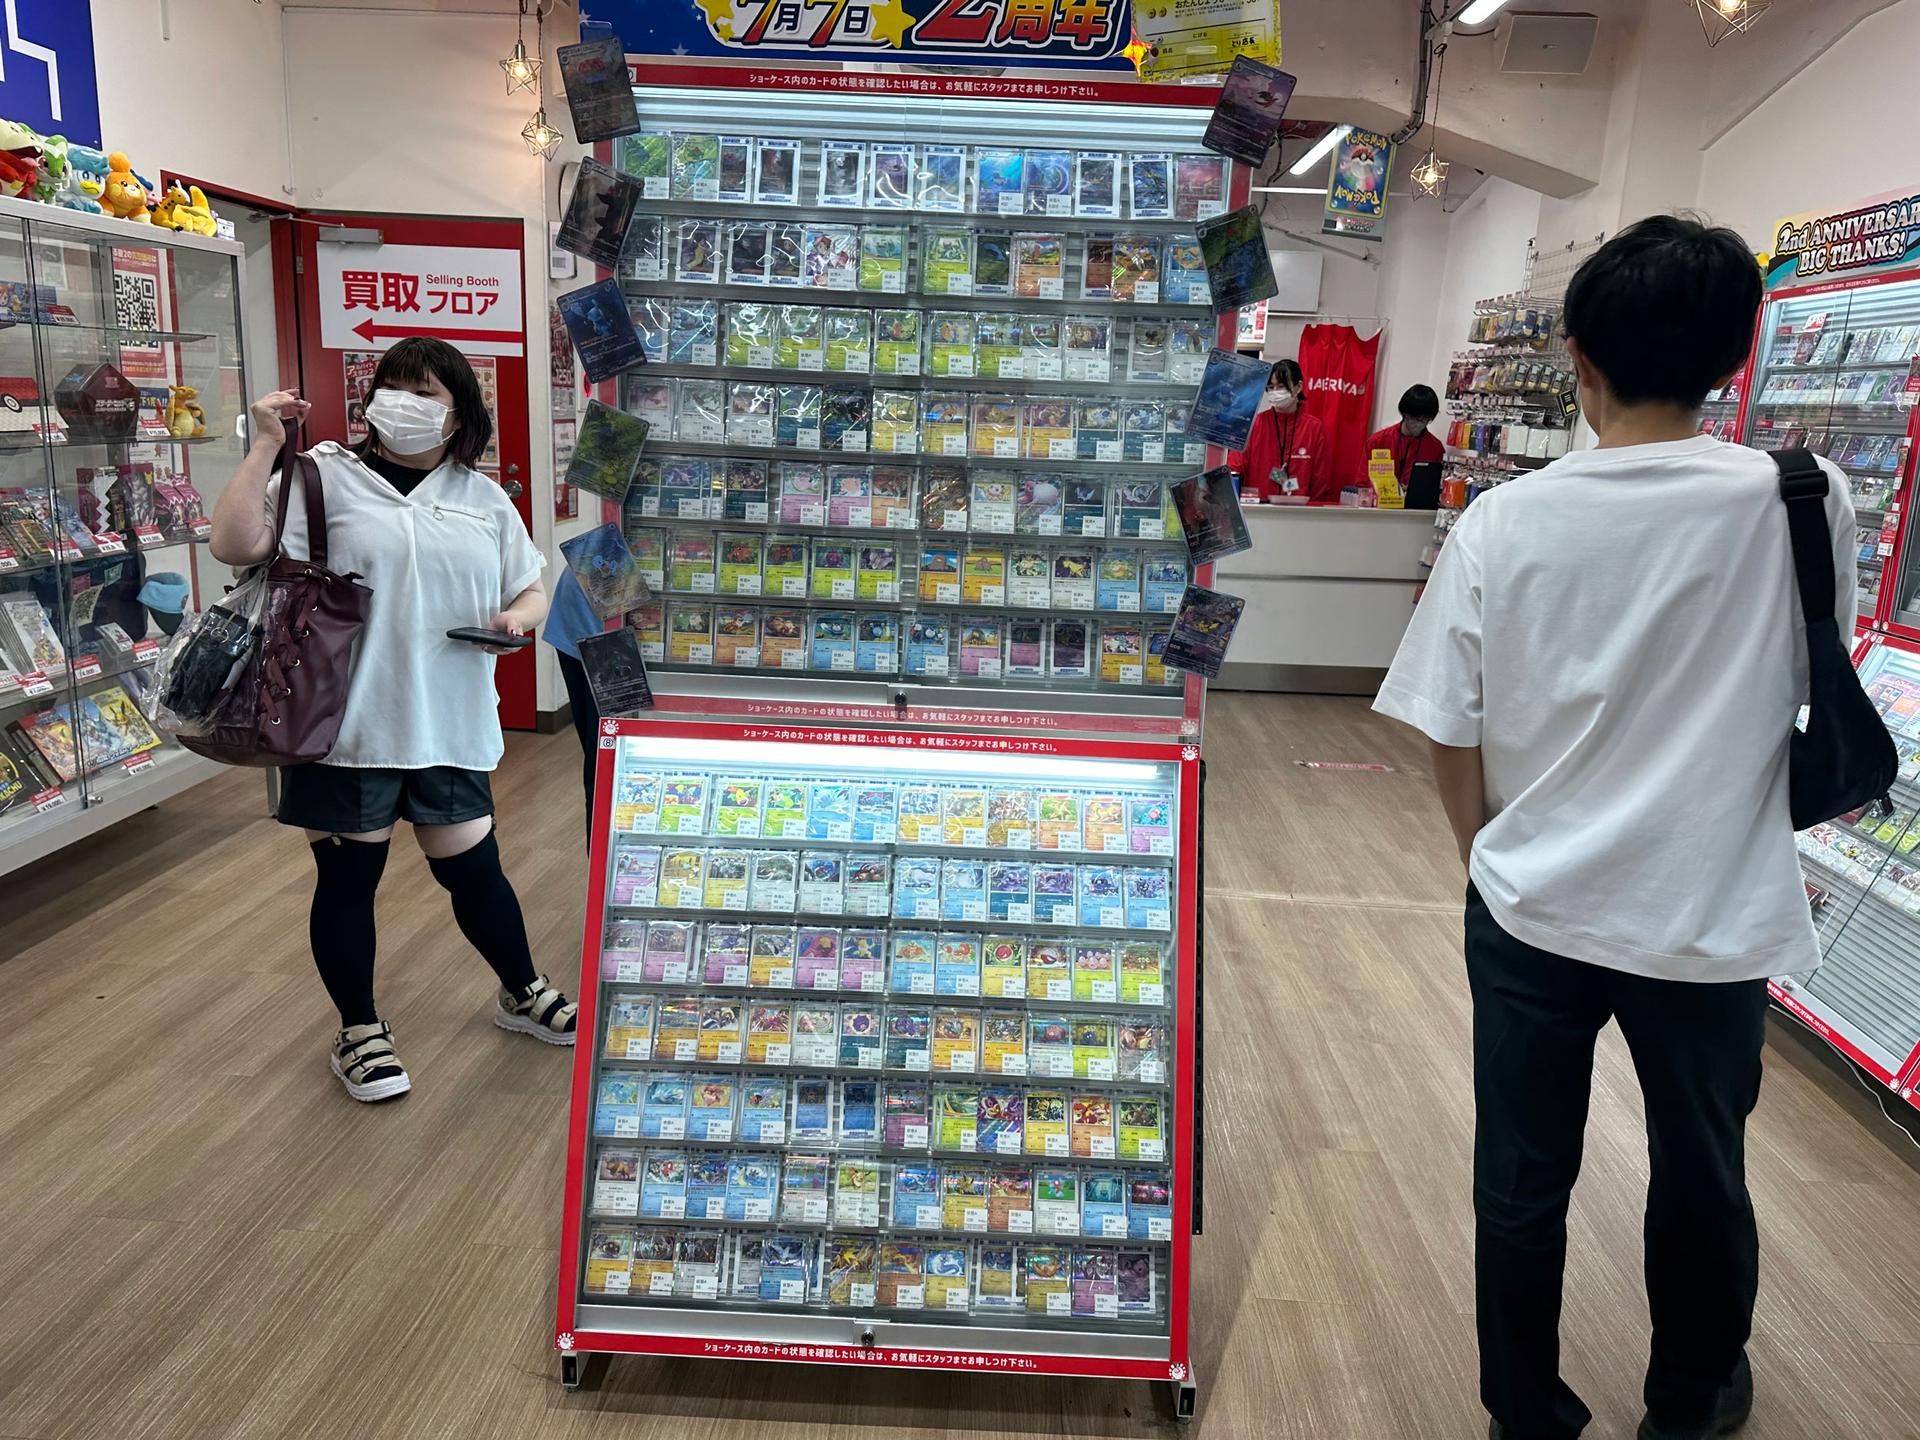 A few customers sneak into a card shop just before closing time in Akihabara, Tokyo. 